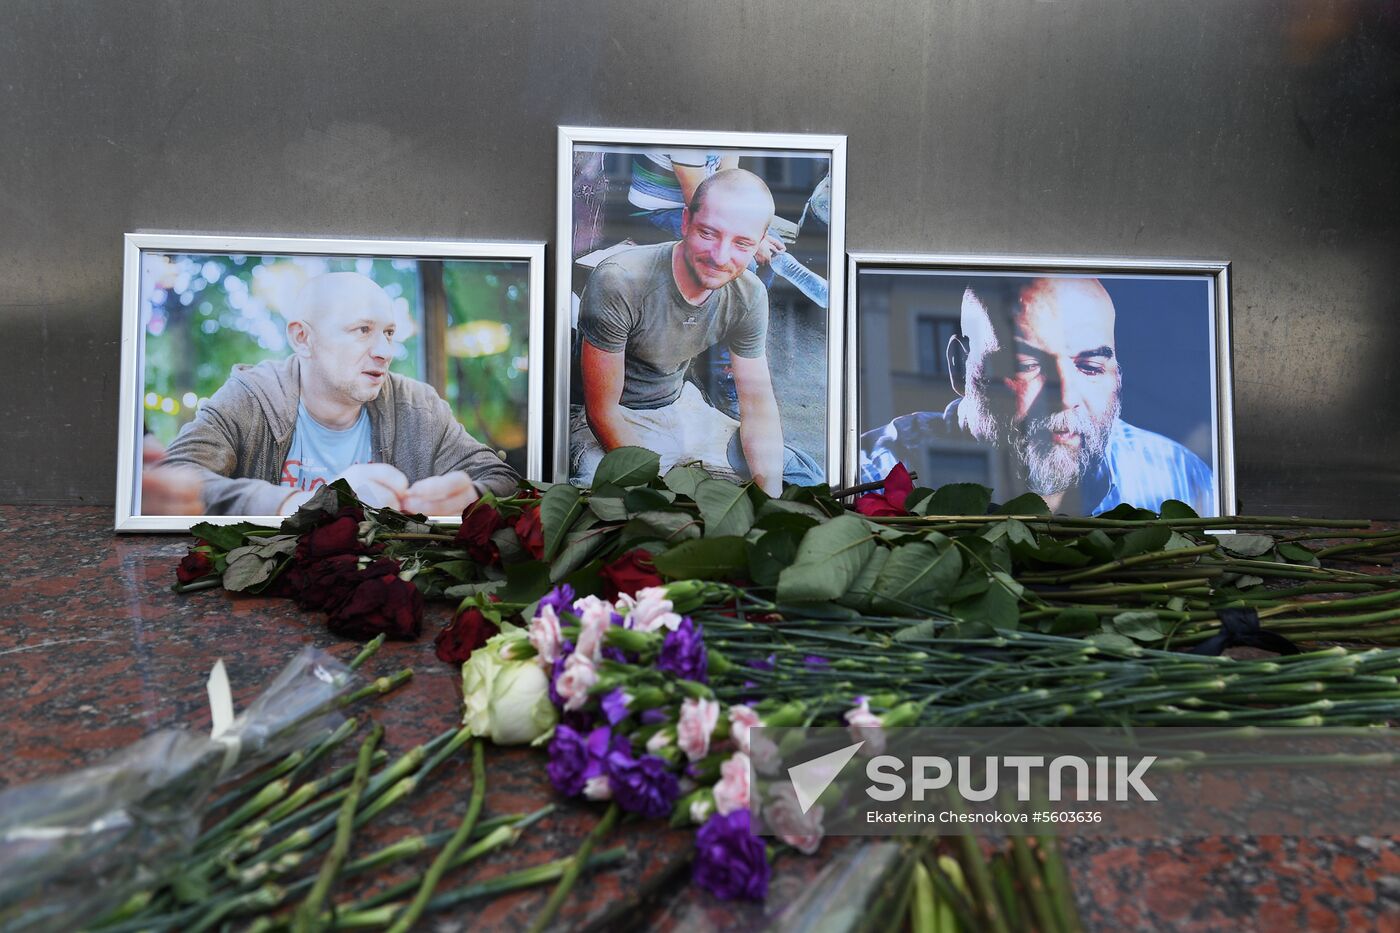 Flowers at Moscow's House of Journalists in memory of three journalists killed in Central Africa